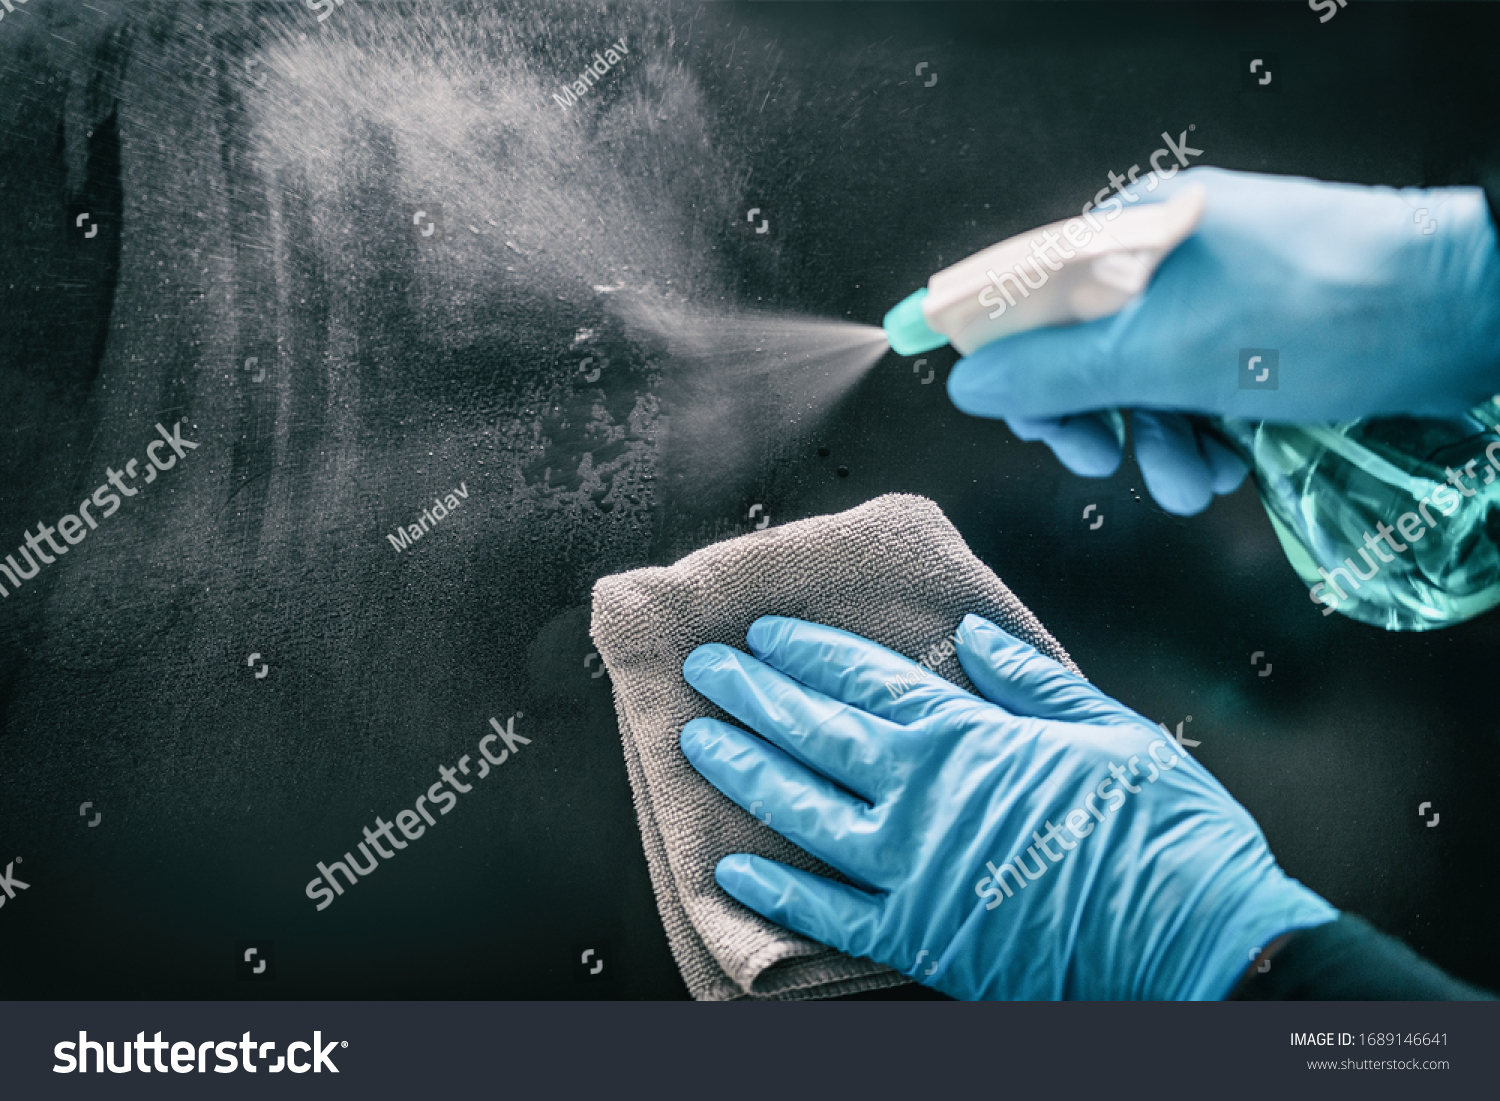 Surface home cleaning spraying antibacterial sanitizing spray bottle disinfecting against COVID-19 spreading wearing medical blue gloves. Sanitize surfaces prevention in hospitals and public spaces. #1689146641